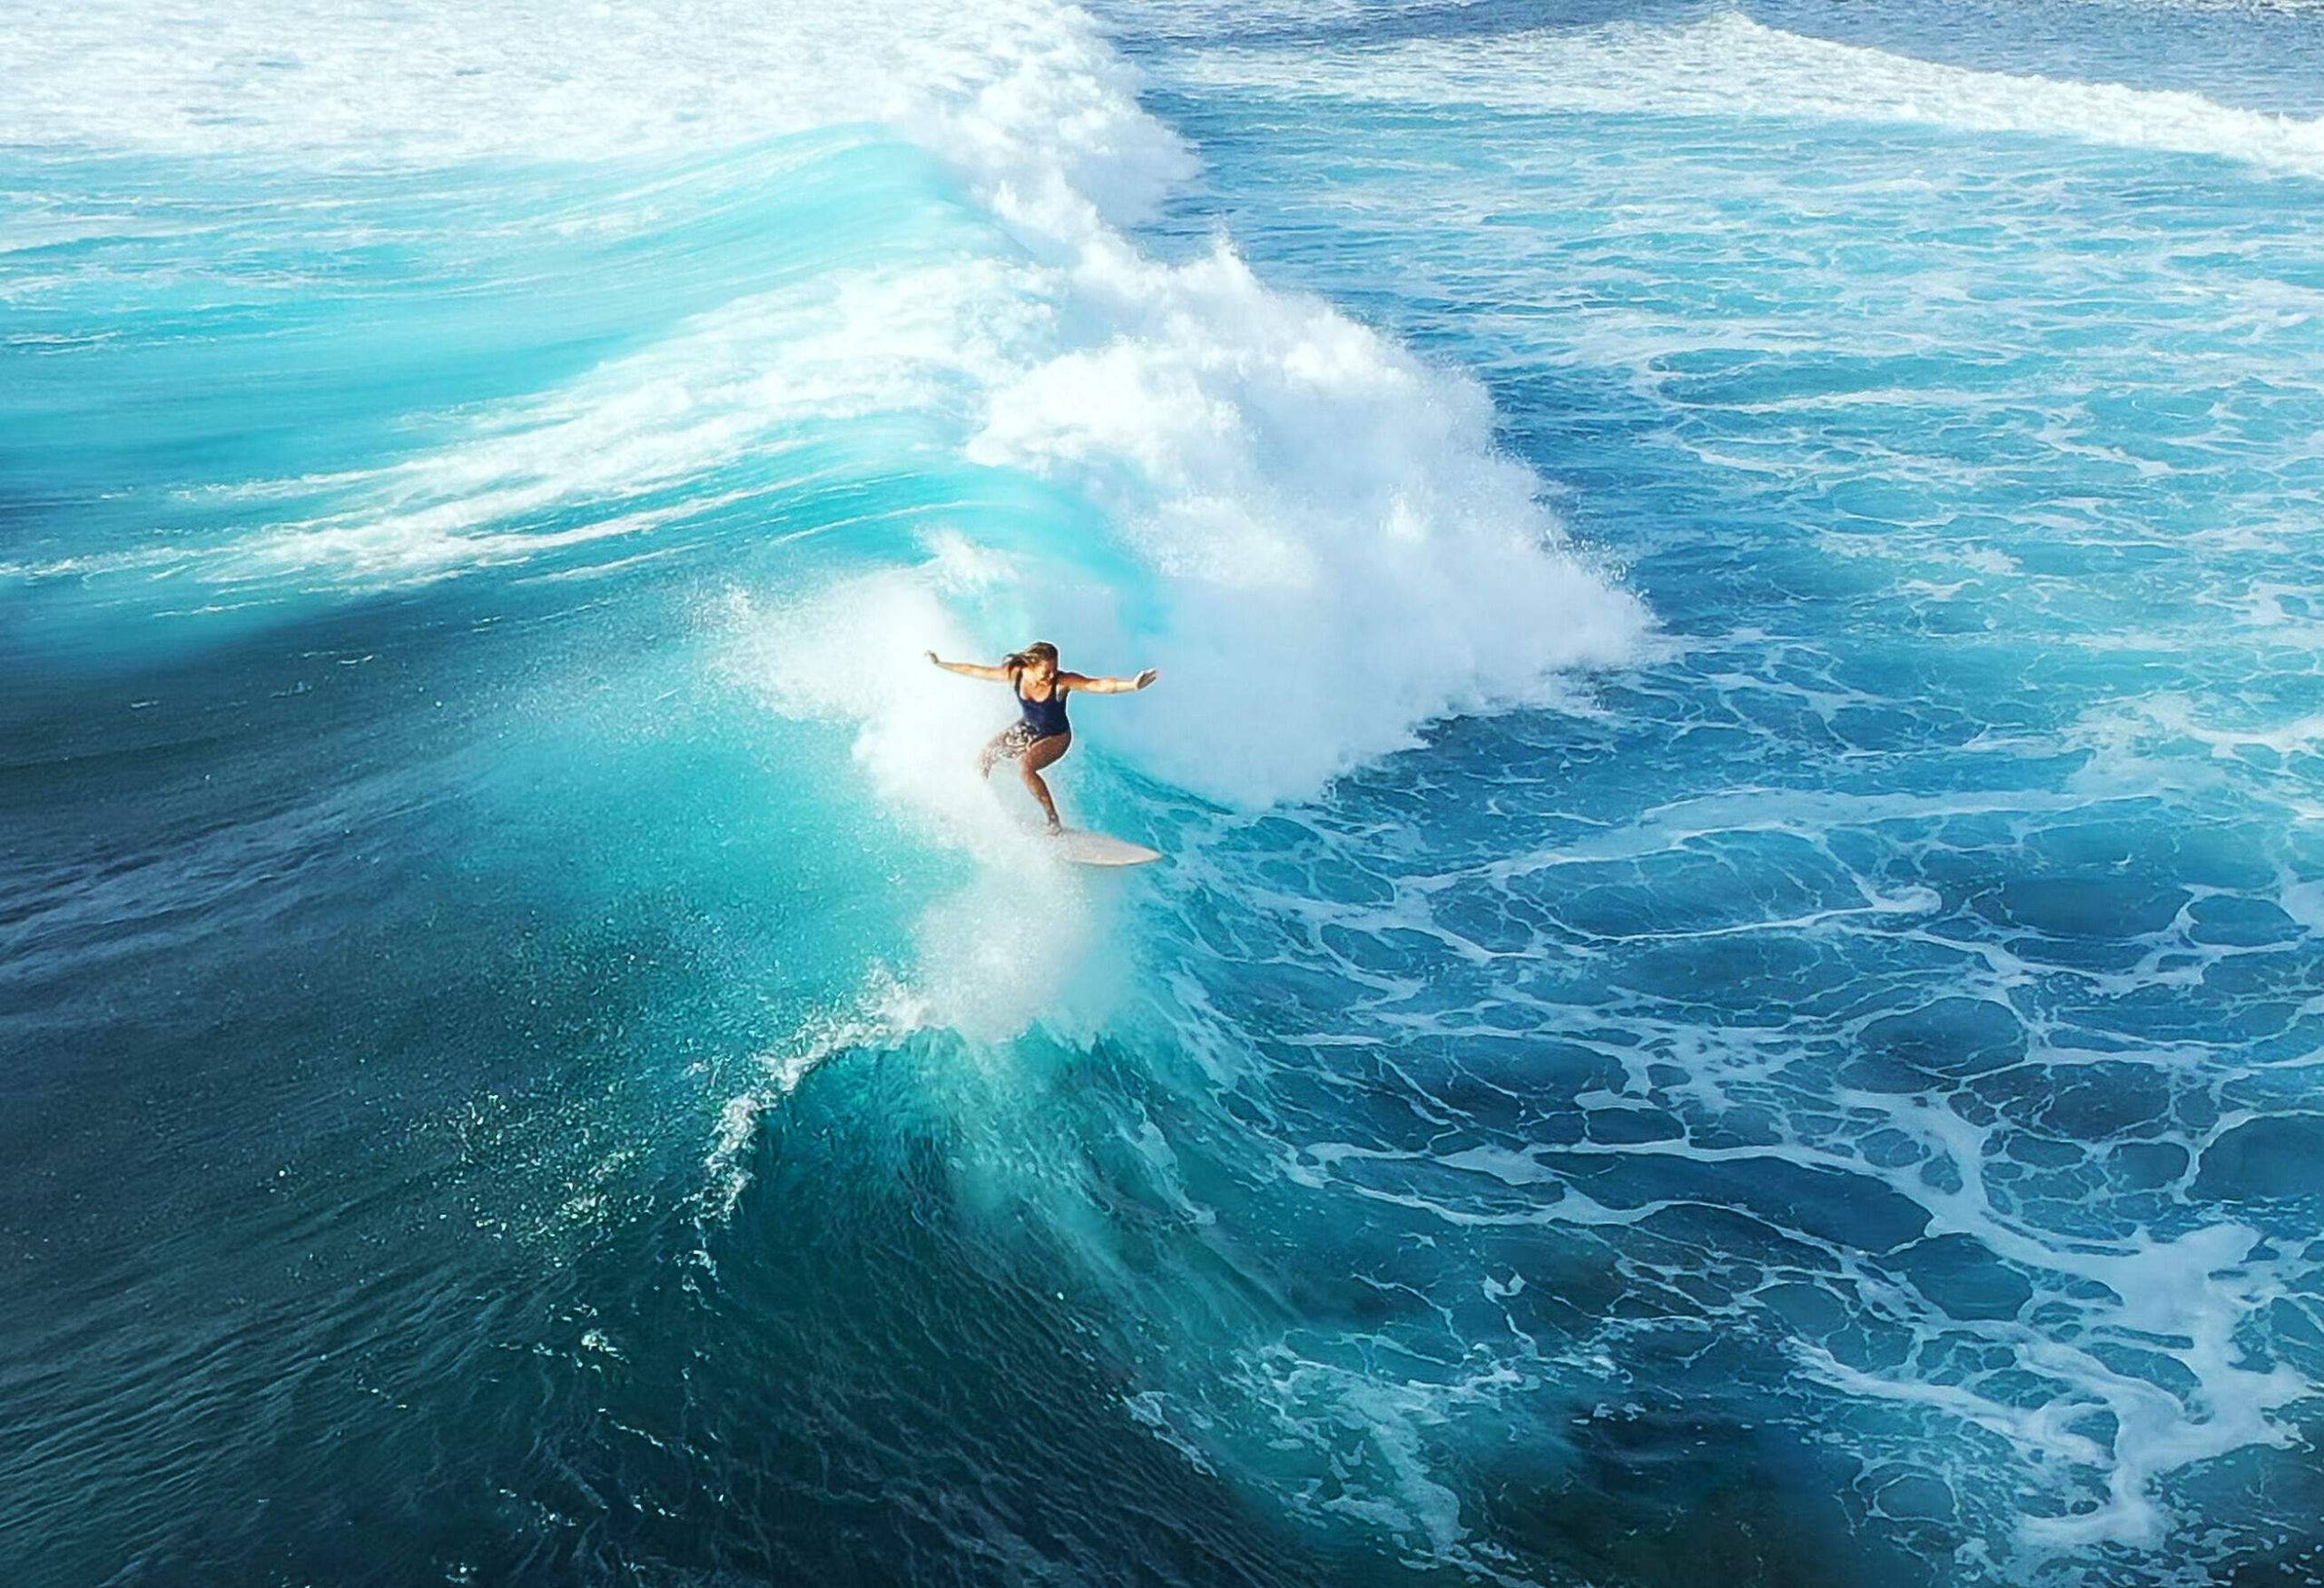 A female surfer riding the massive waves of a turquoise ocean.